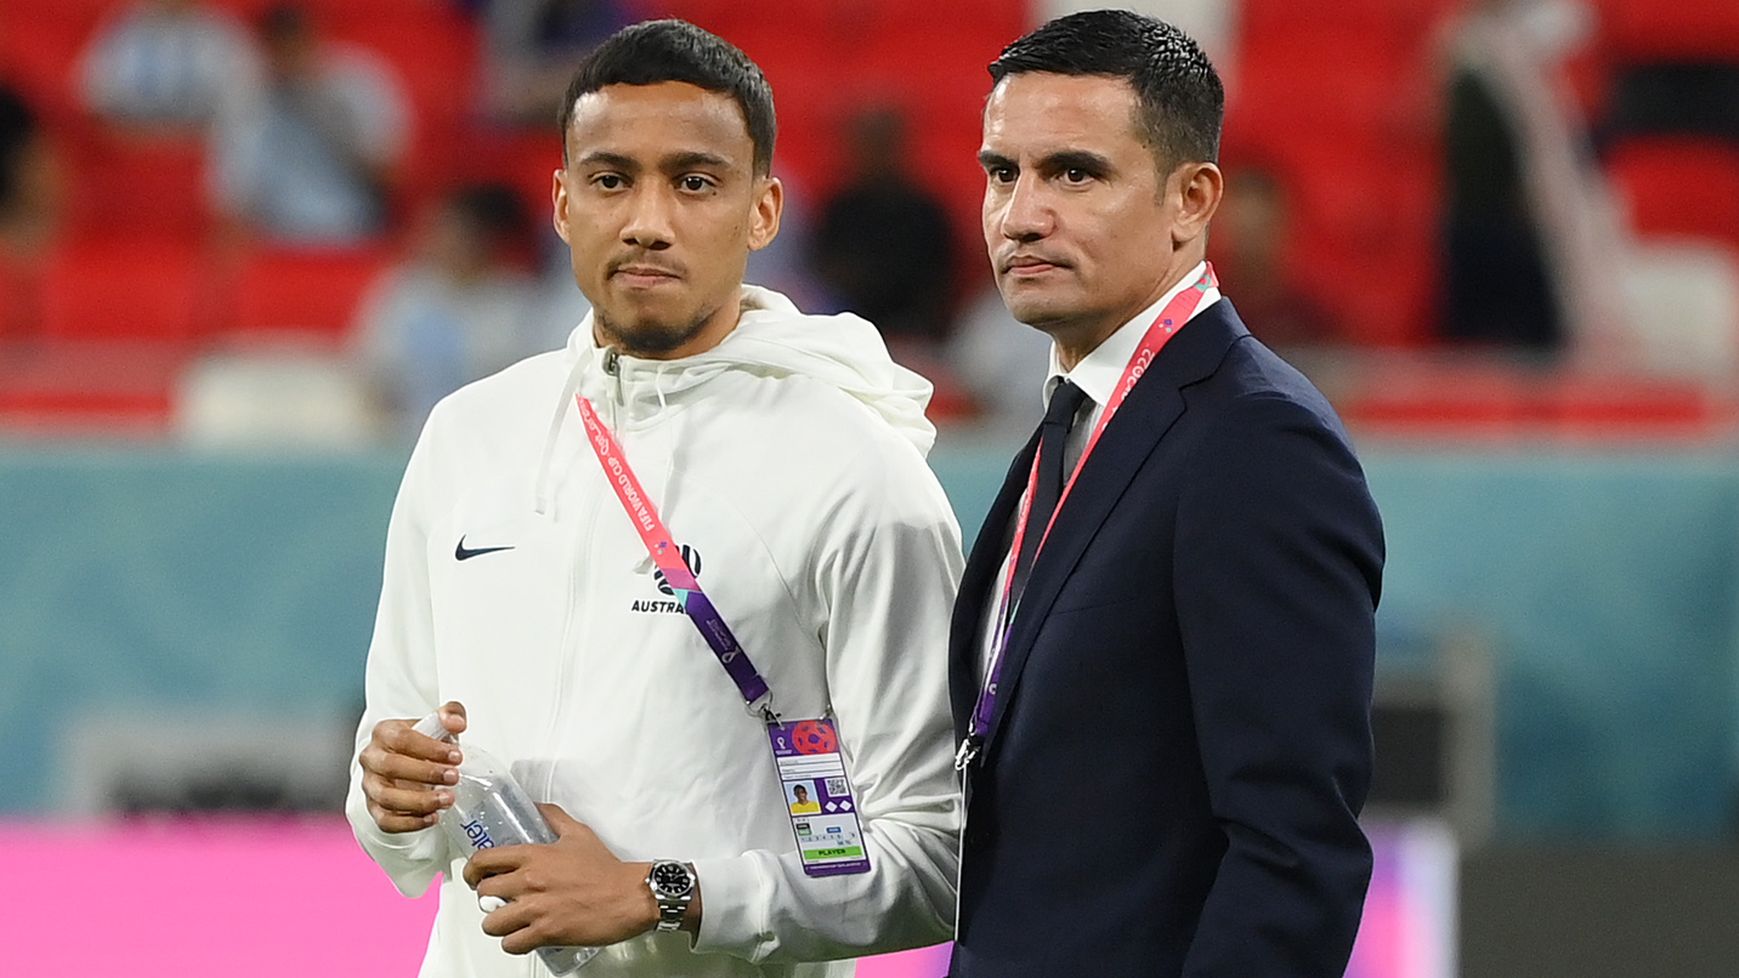 Concerning video emerges as Tim Cahill dragged away from interview after human rights question